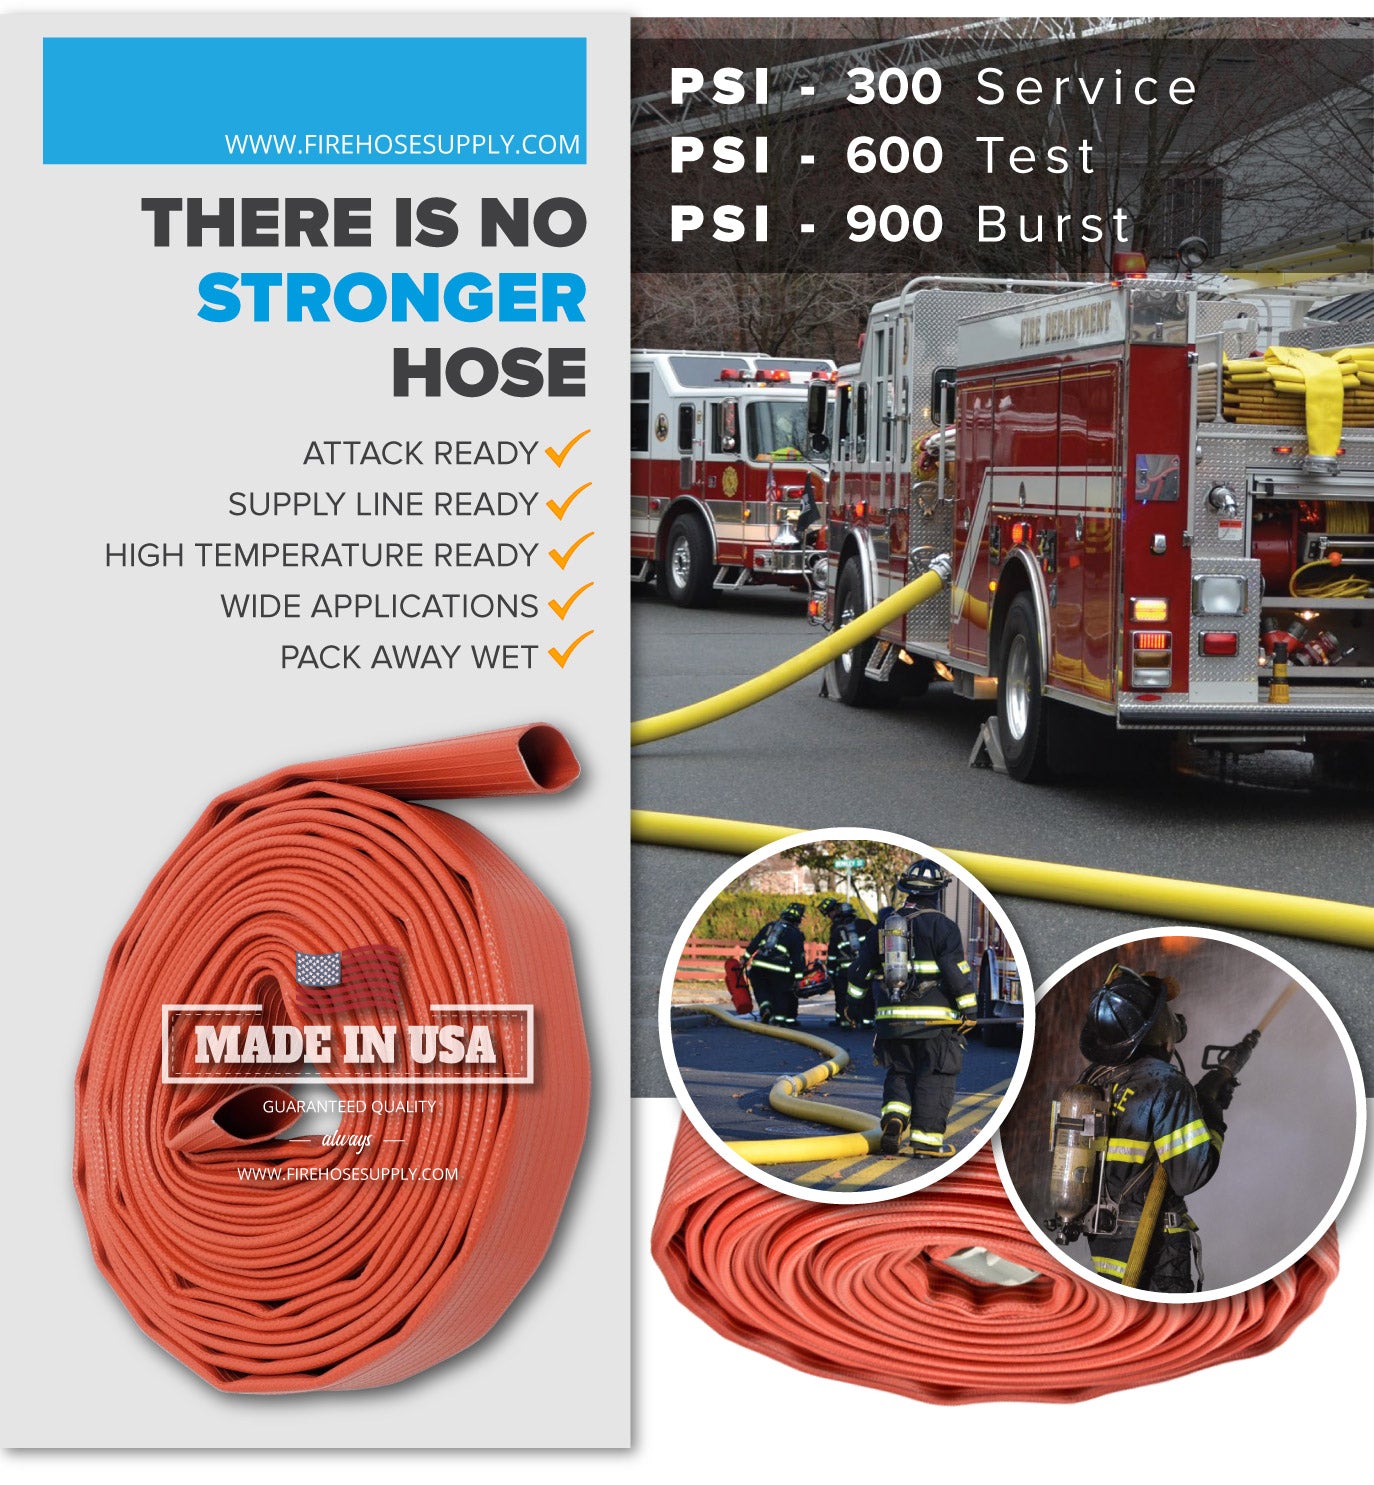 1.5 Inch Rubber Fire Hose Material Only Supply And Attack Ready Firefighter Red 600 PSI Test